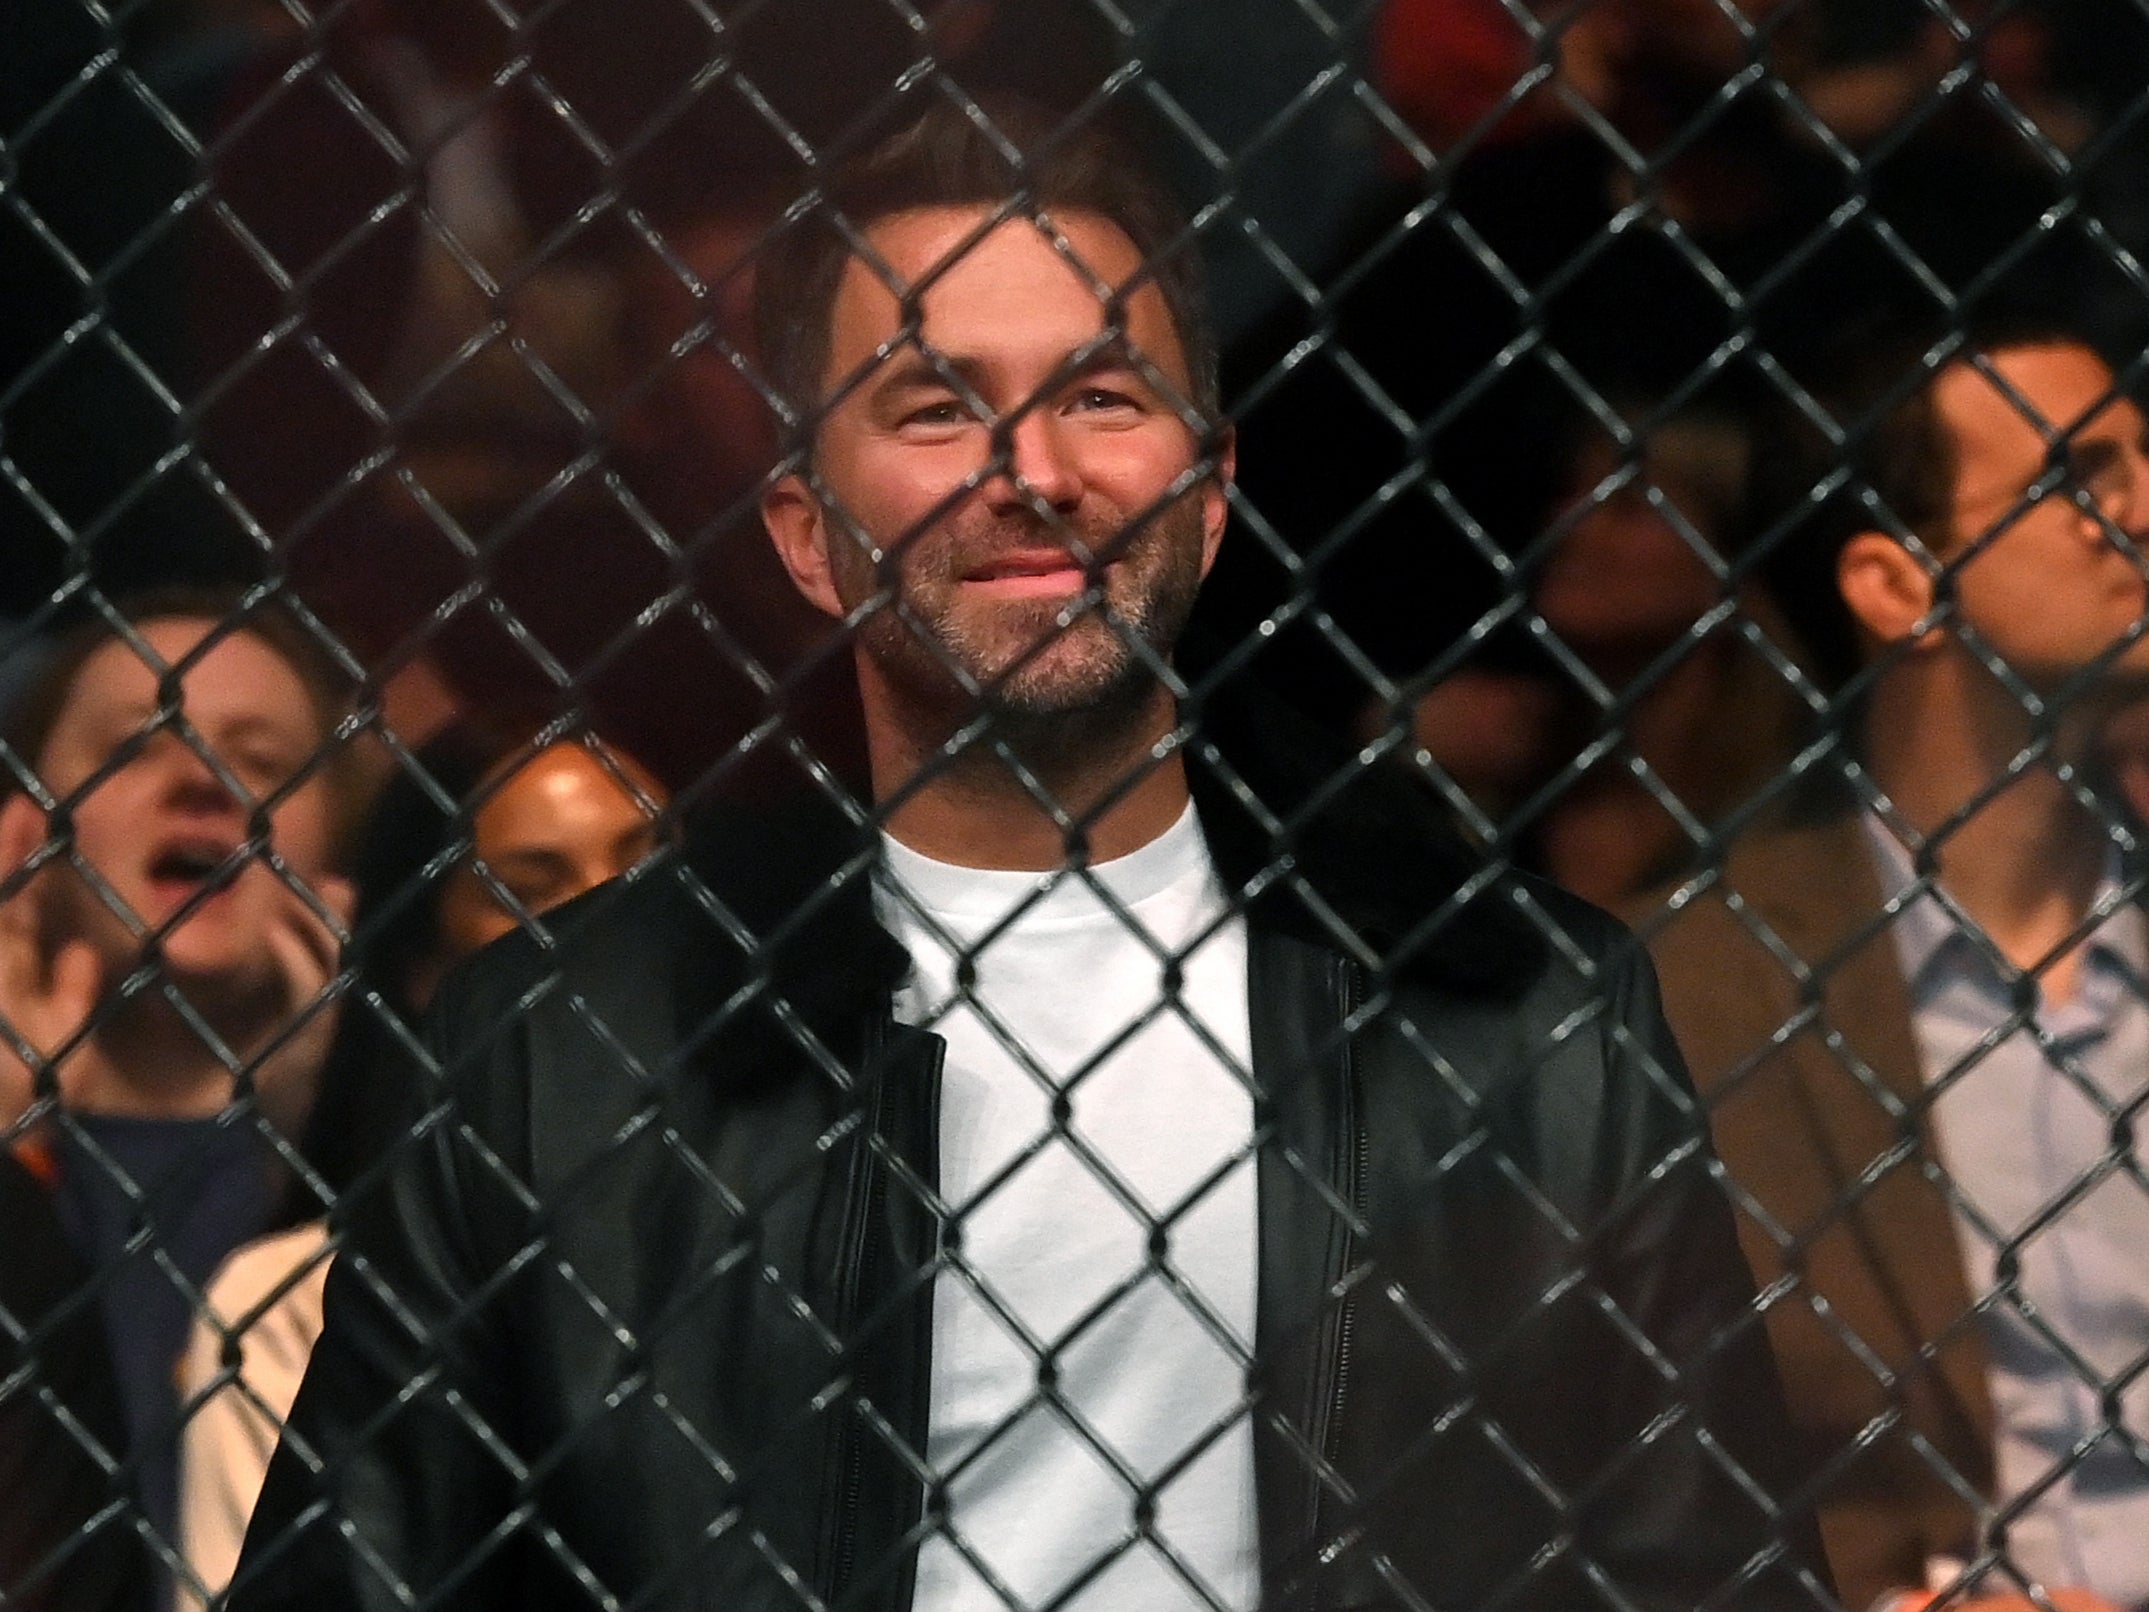 Matchroom Boxing’s Eddie Hearn attended UFC London this month